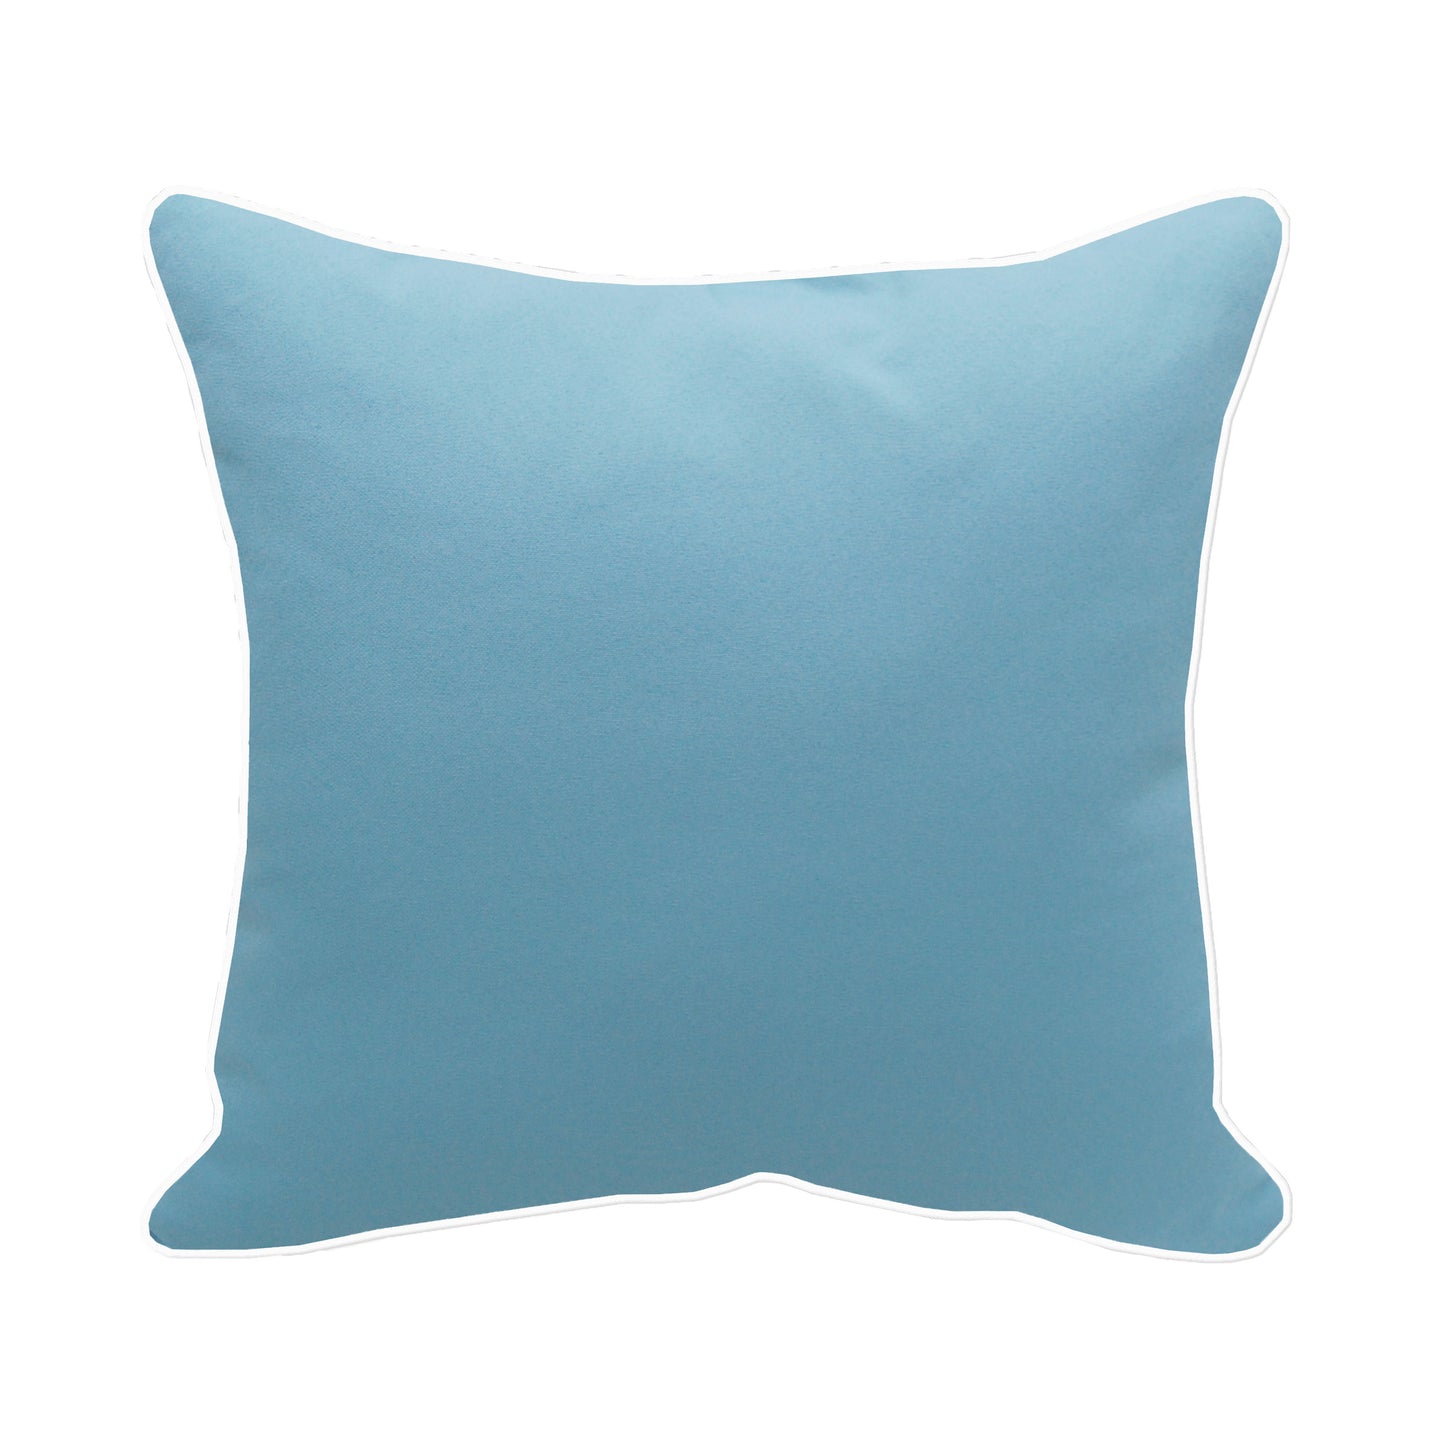 Solid blue fabric; back of the Snowy White Egret Indoor Outdoor pillow